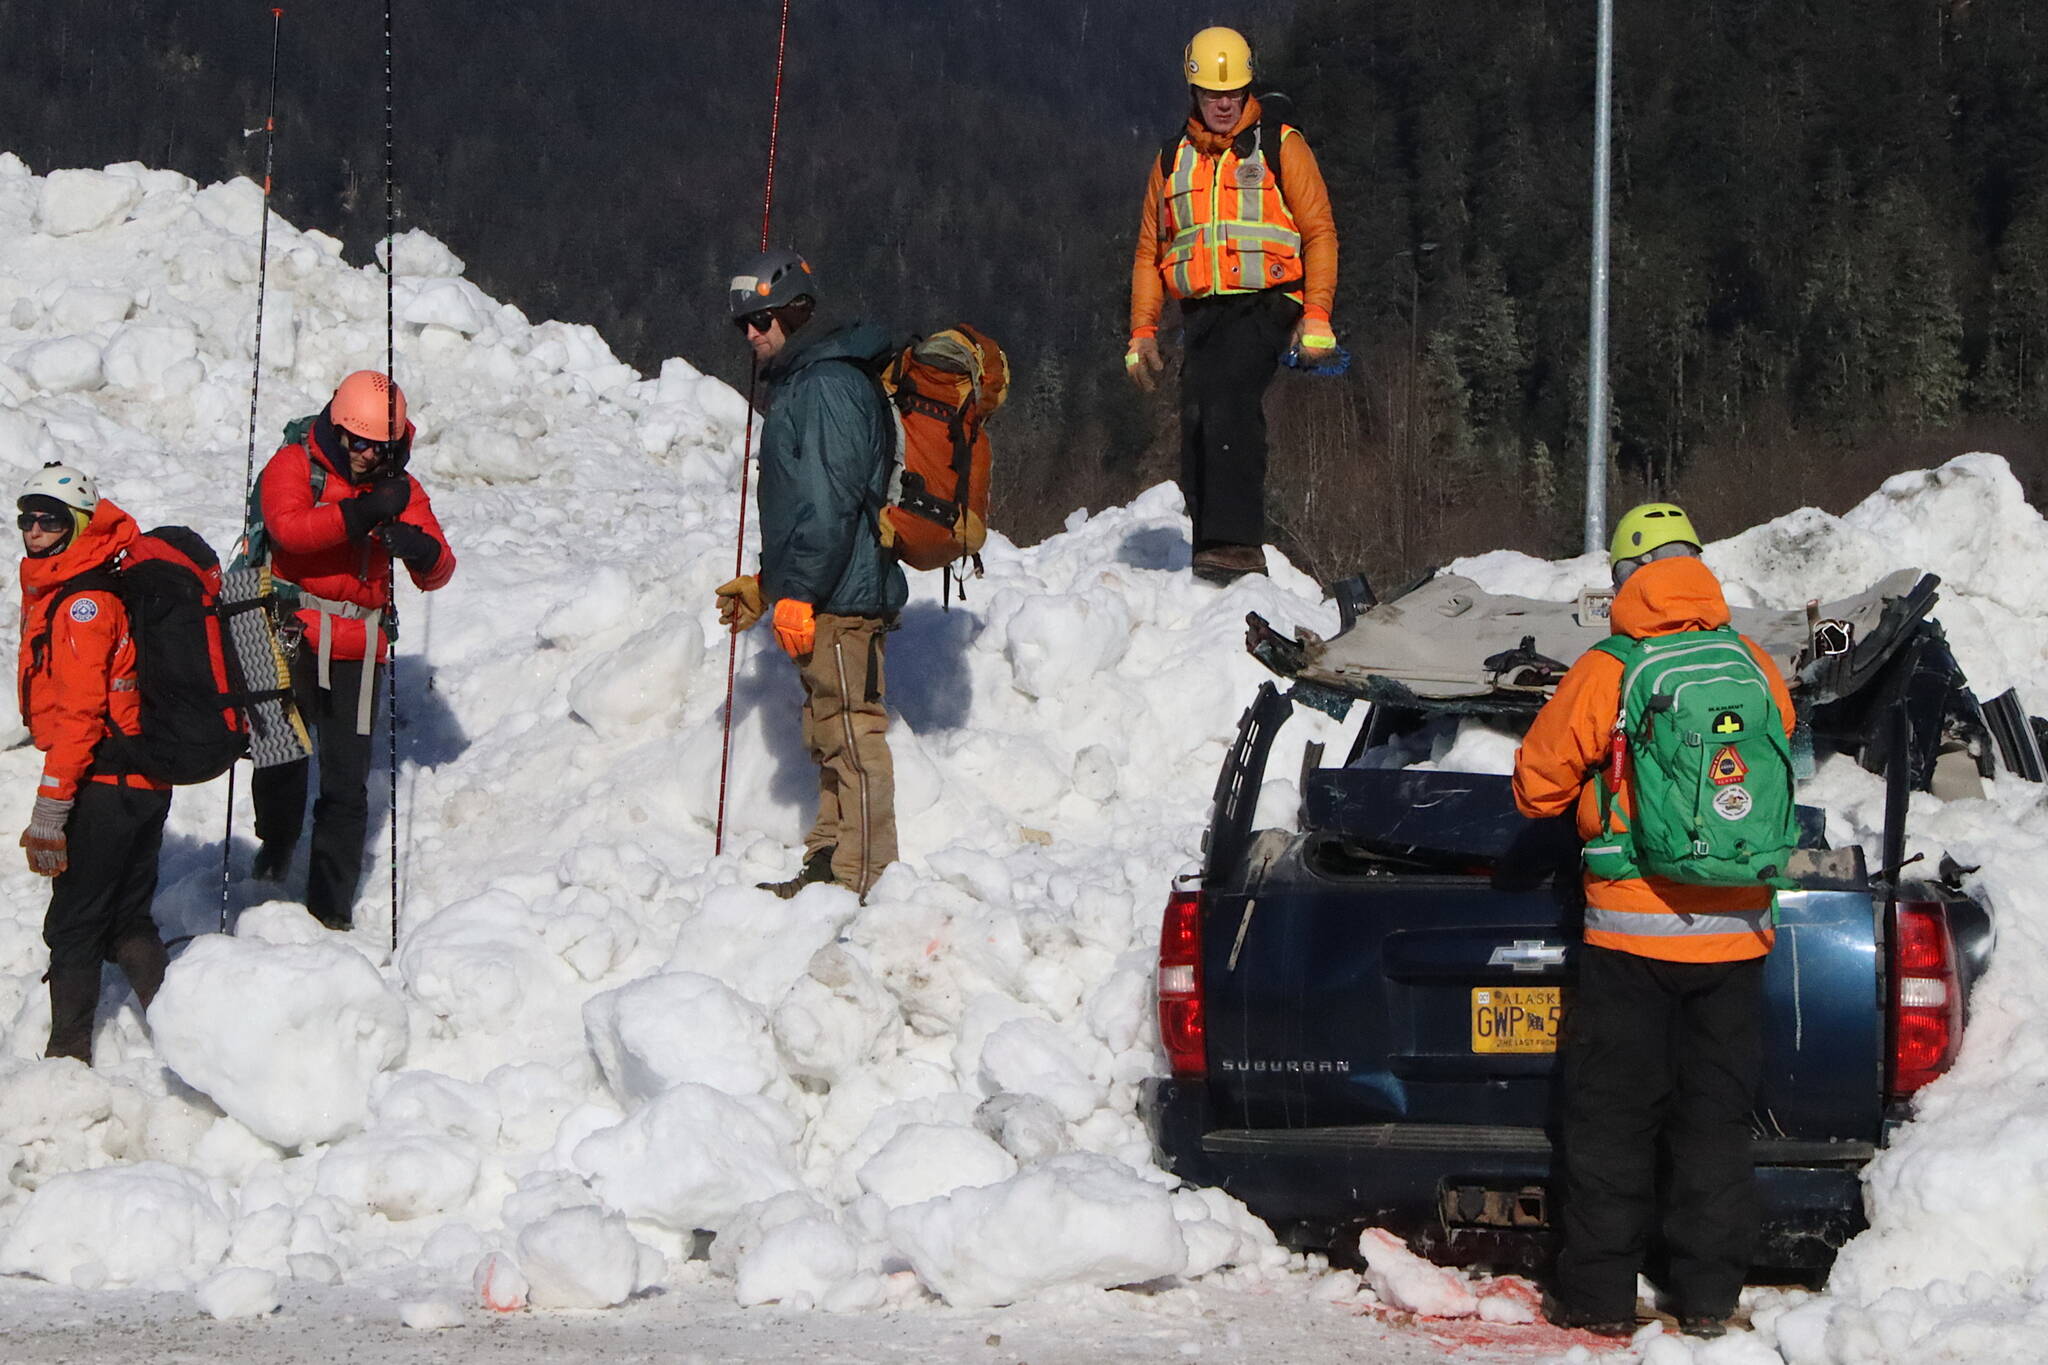 Emergency response officials probe the wreckage of a simulated avalanche site during a training exercise in Lemon Creek on Saturday. (Mark Sabbatini / Juneau Empire)